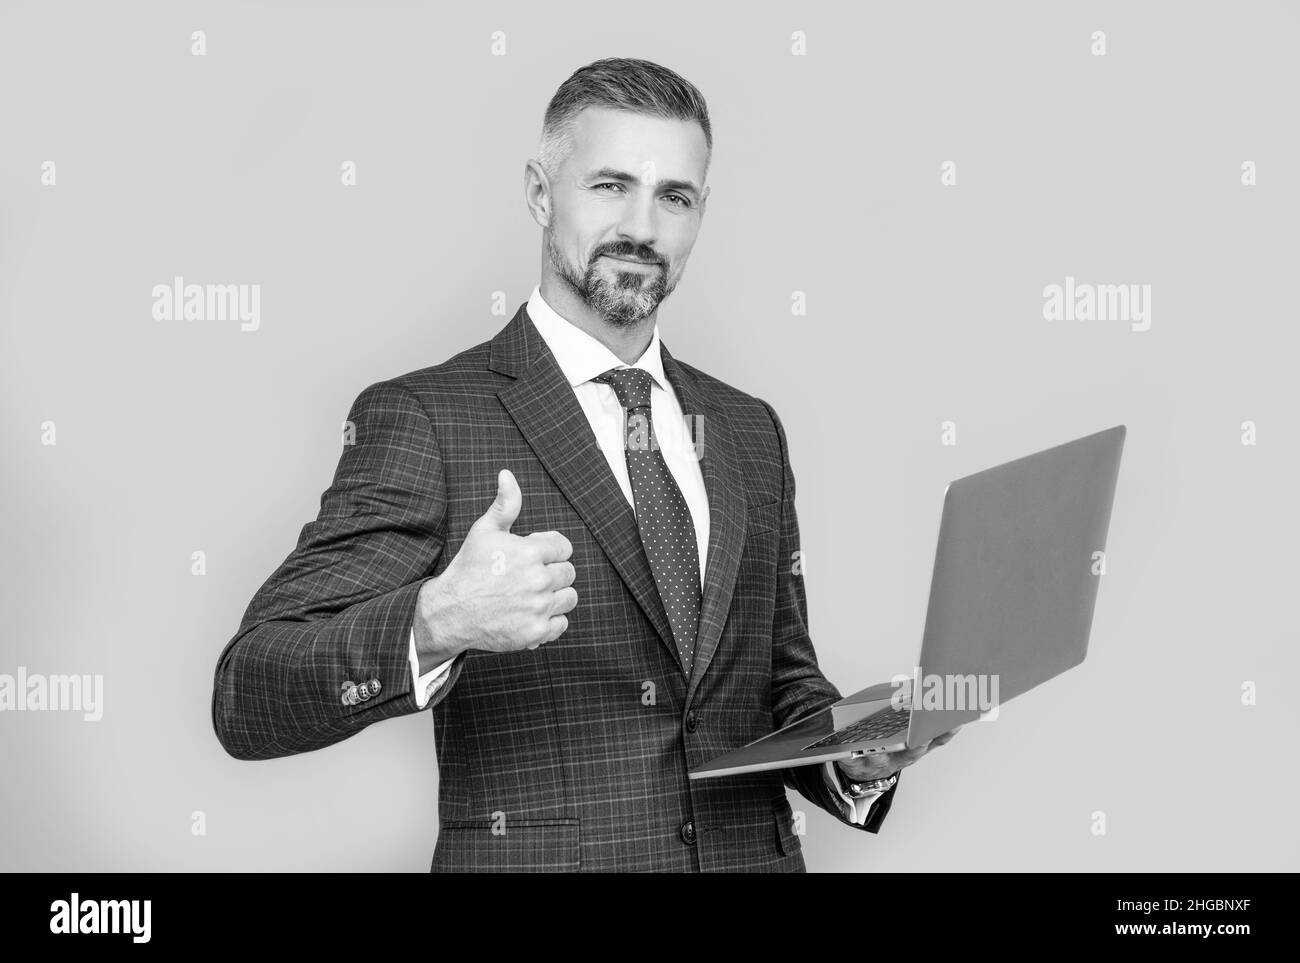 confident businessman man in businesslike suit hold computer show thumb up, success Stock Photo